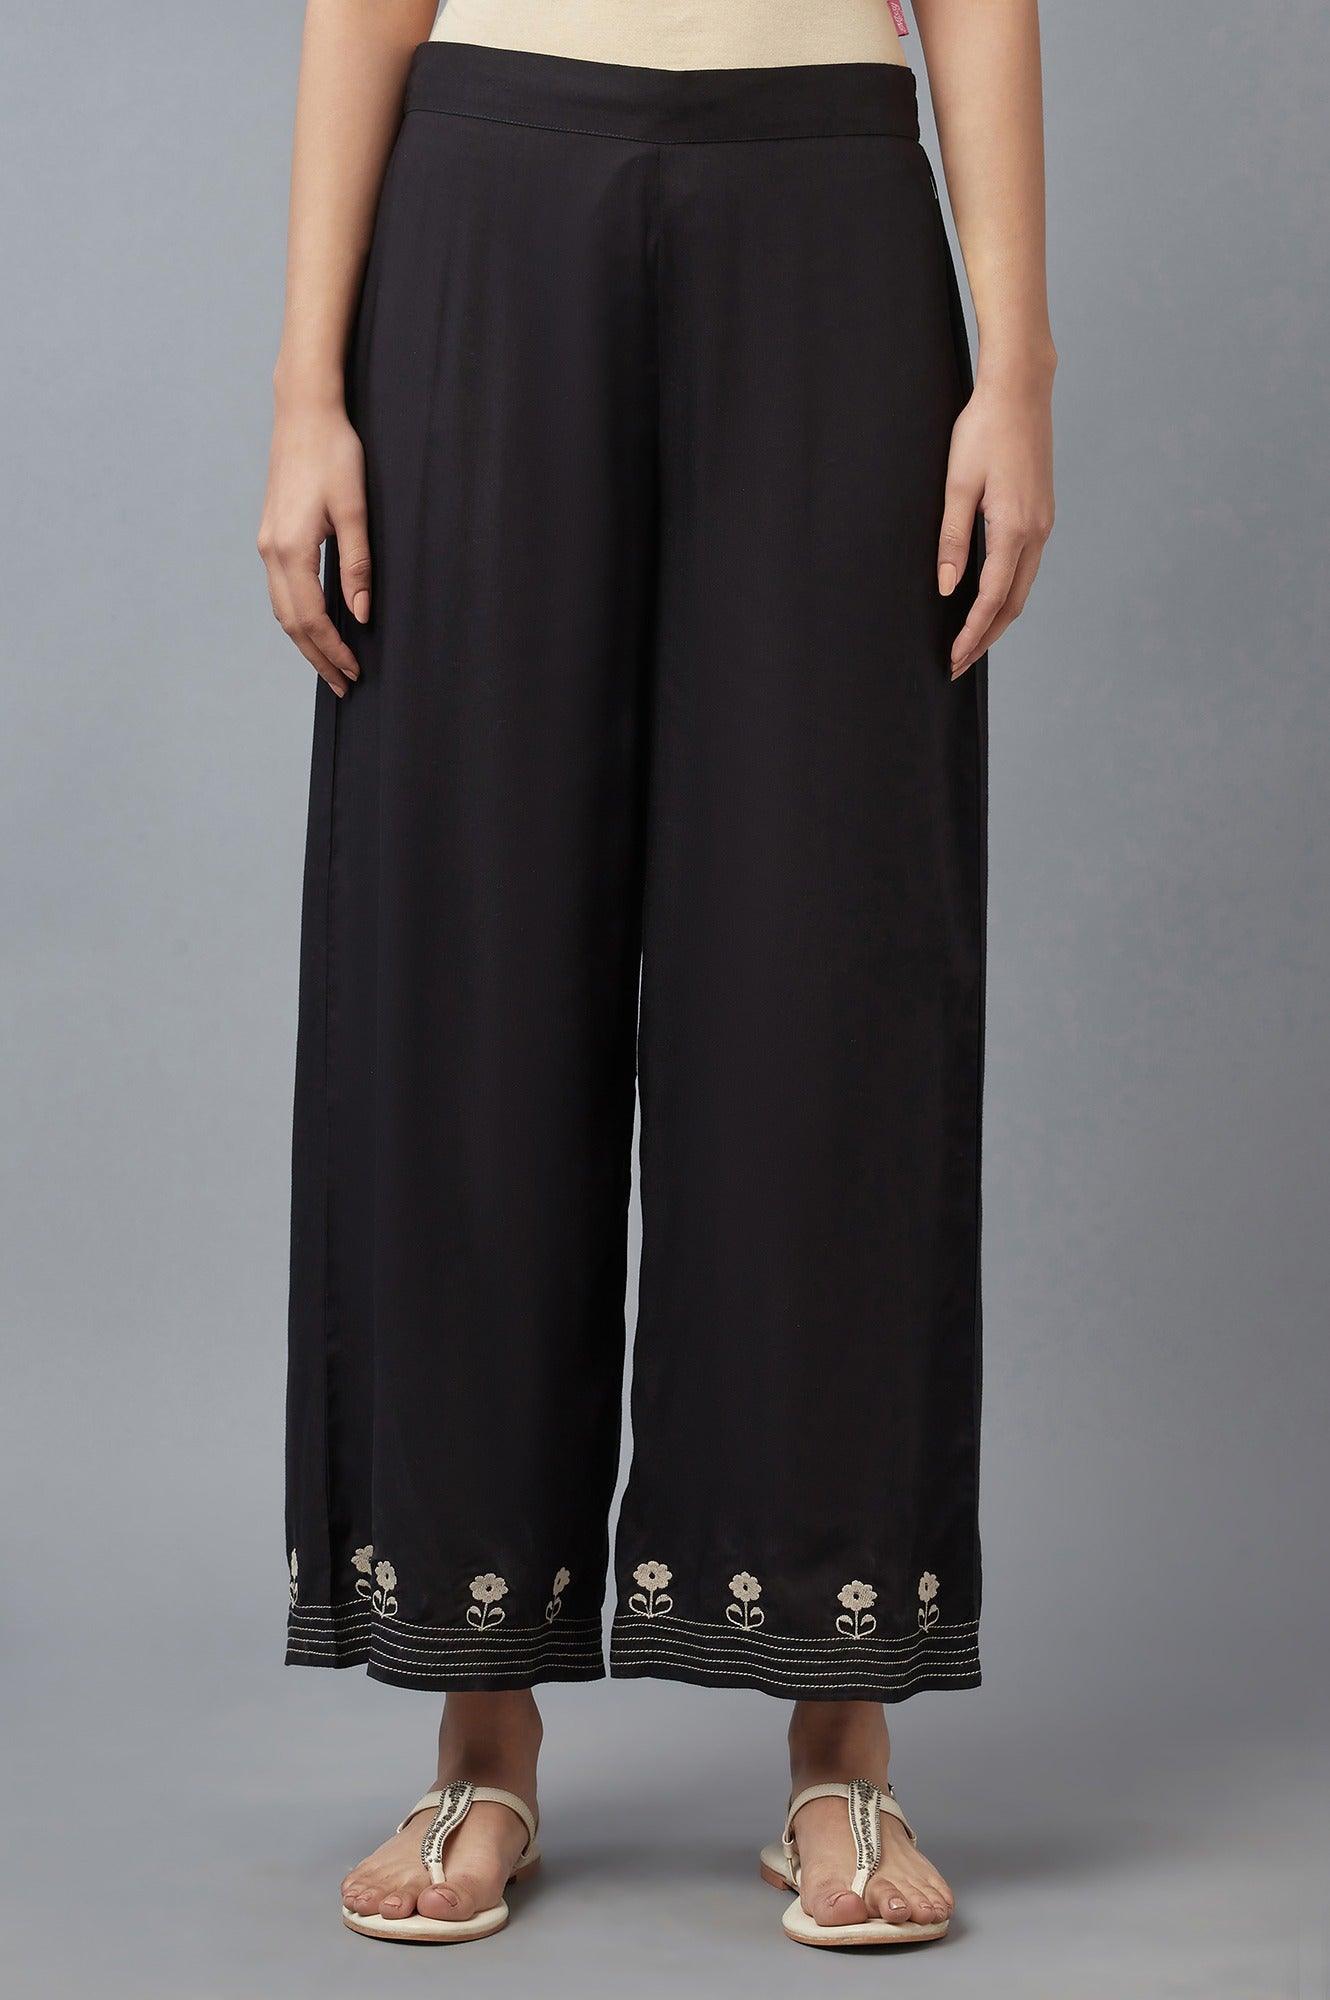 Jet Black Embroidered Parallel Pants - wforwoman